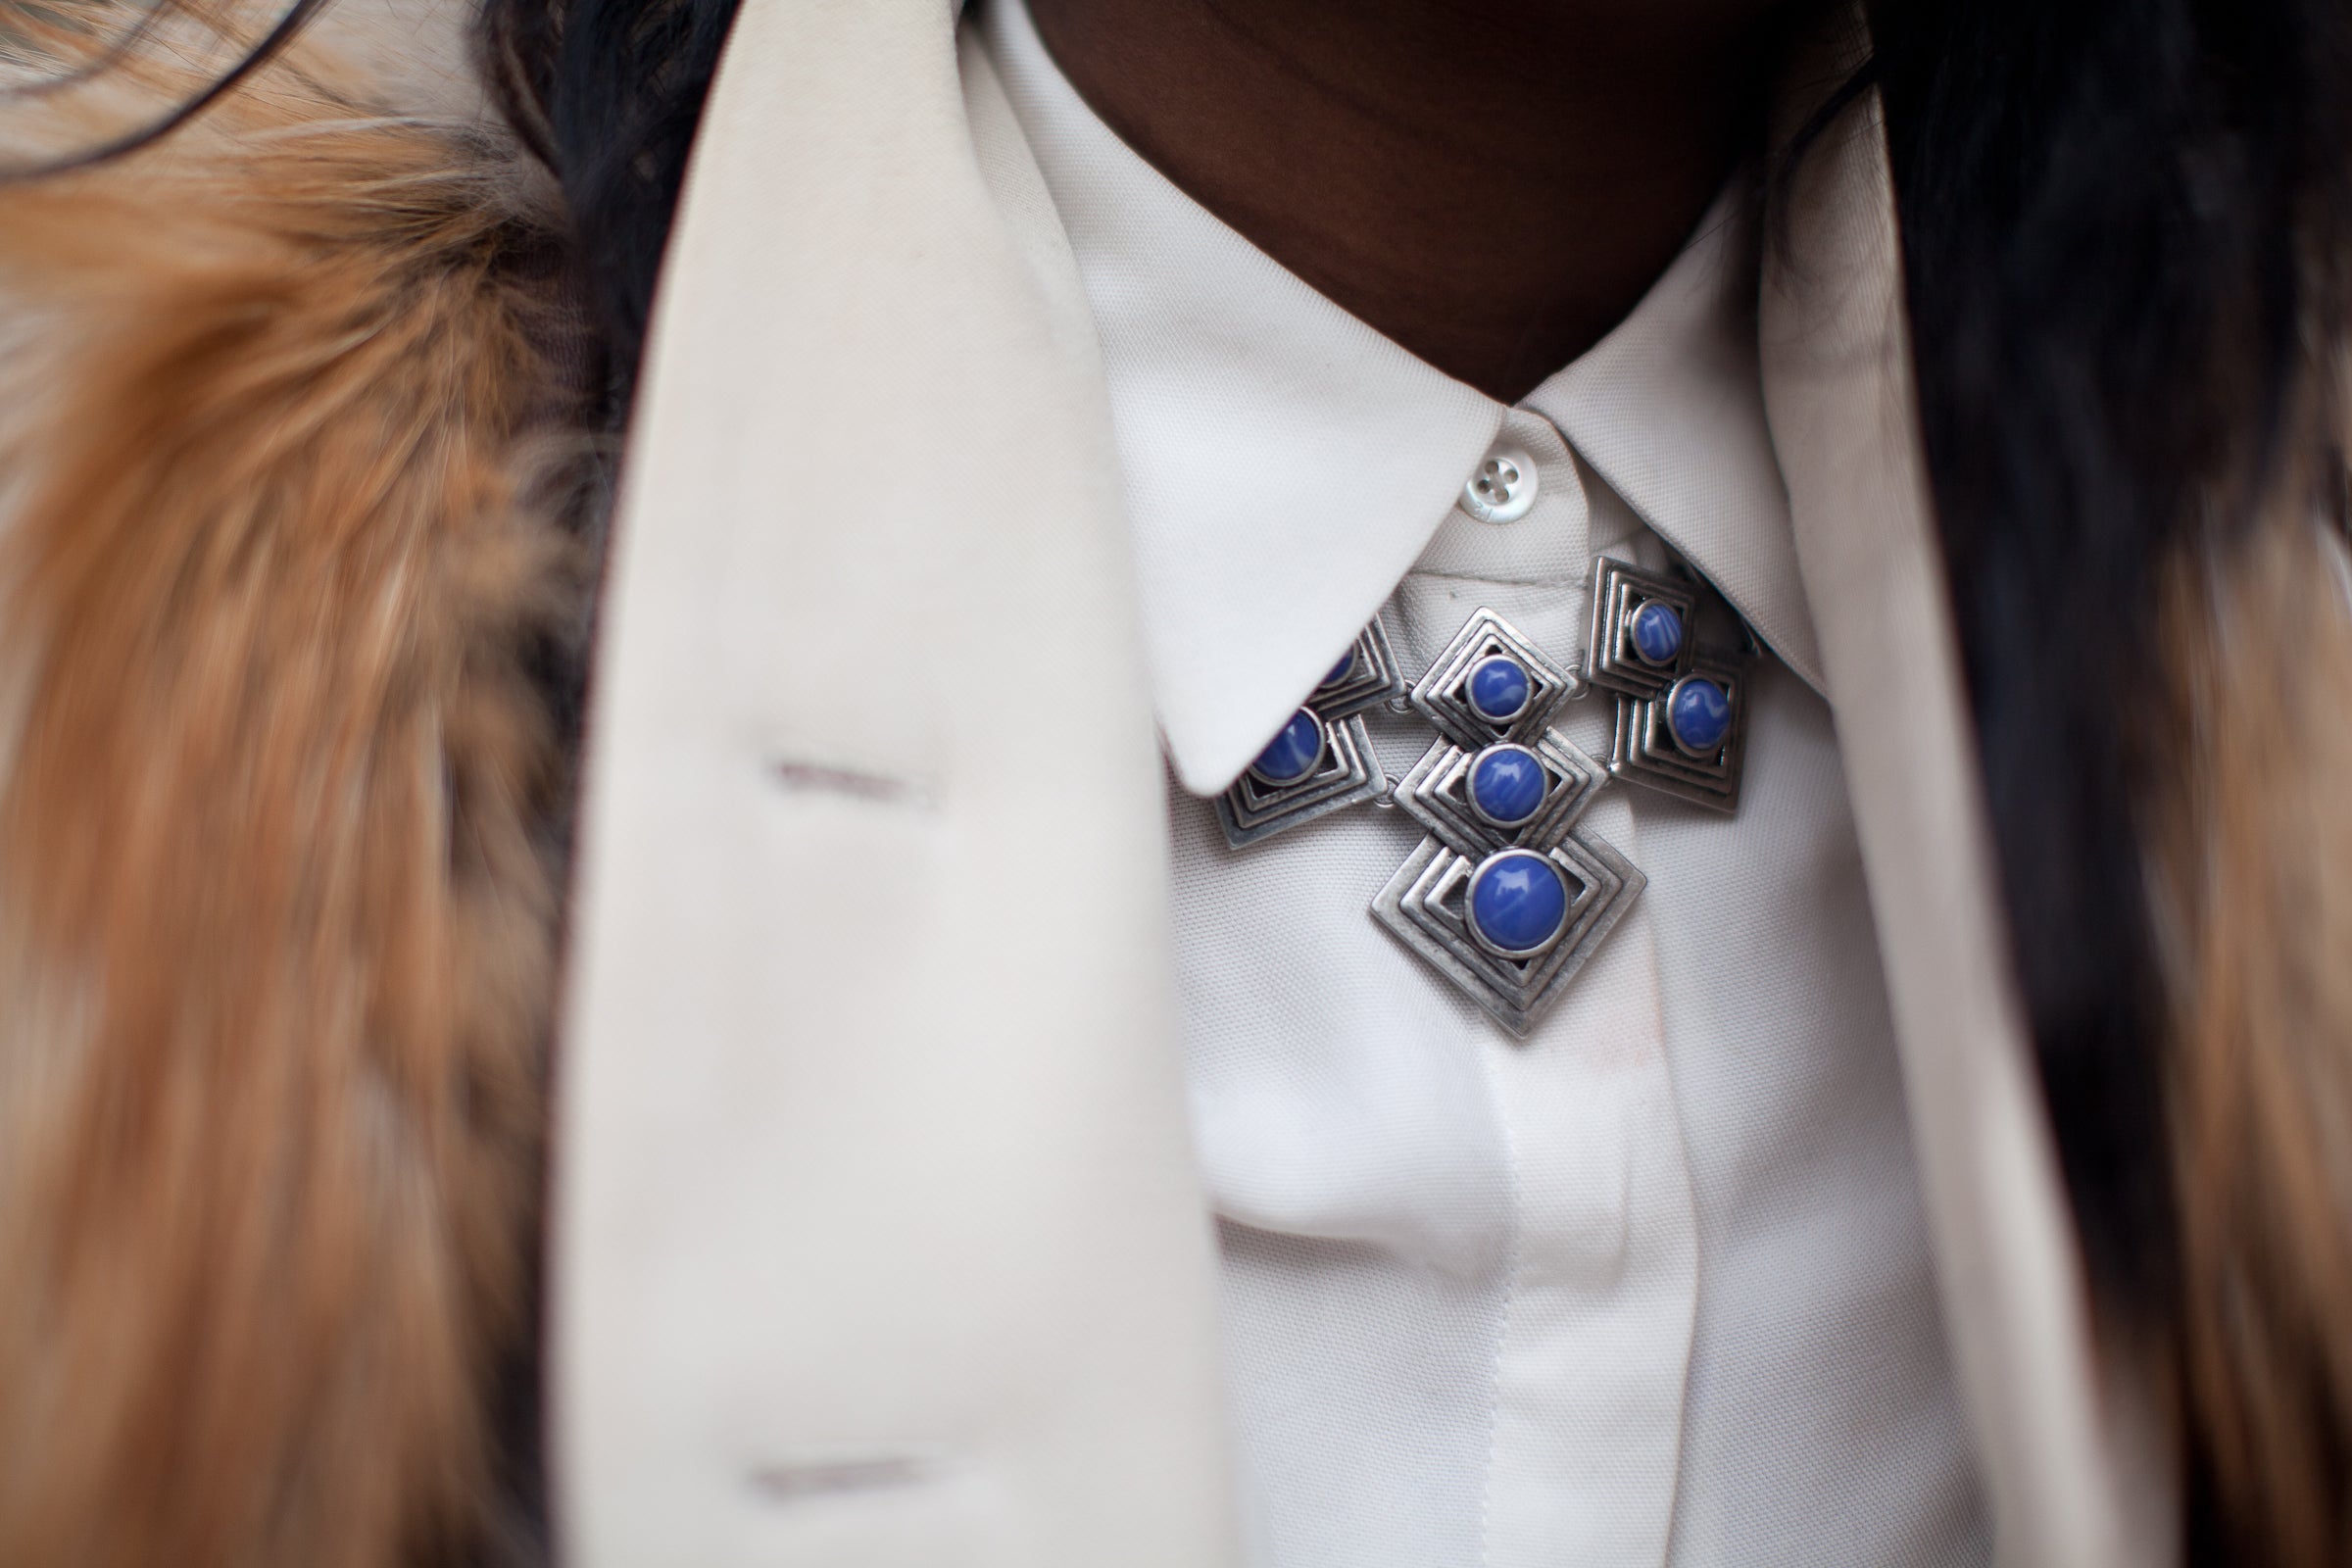 Street Style Accessories: Making Statements